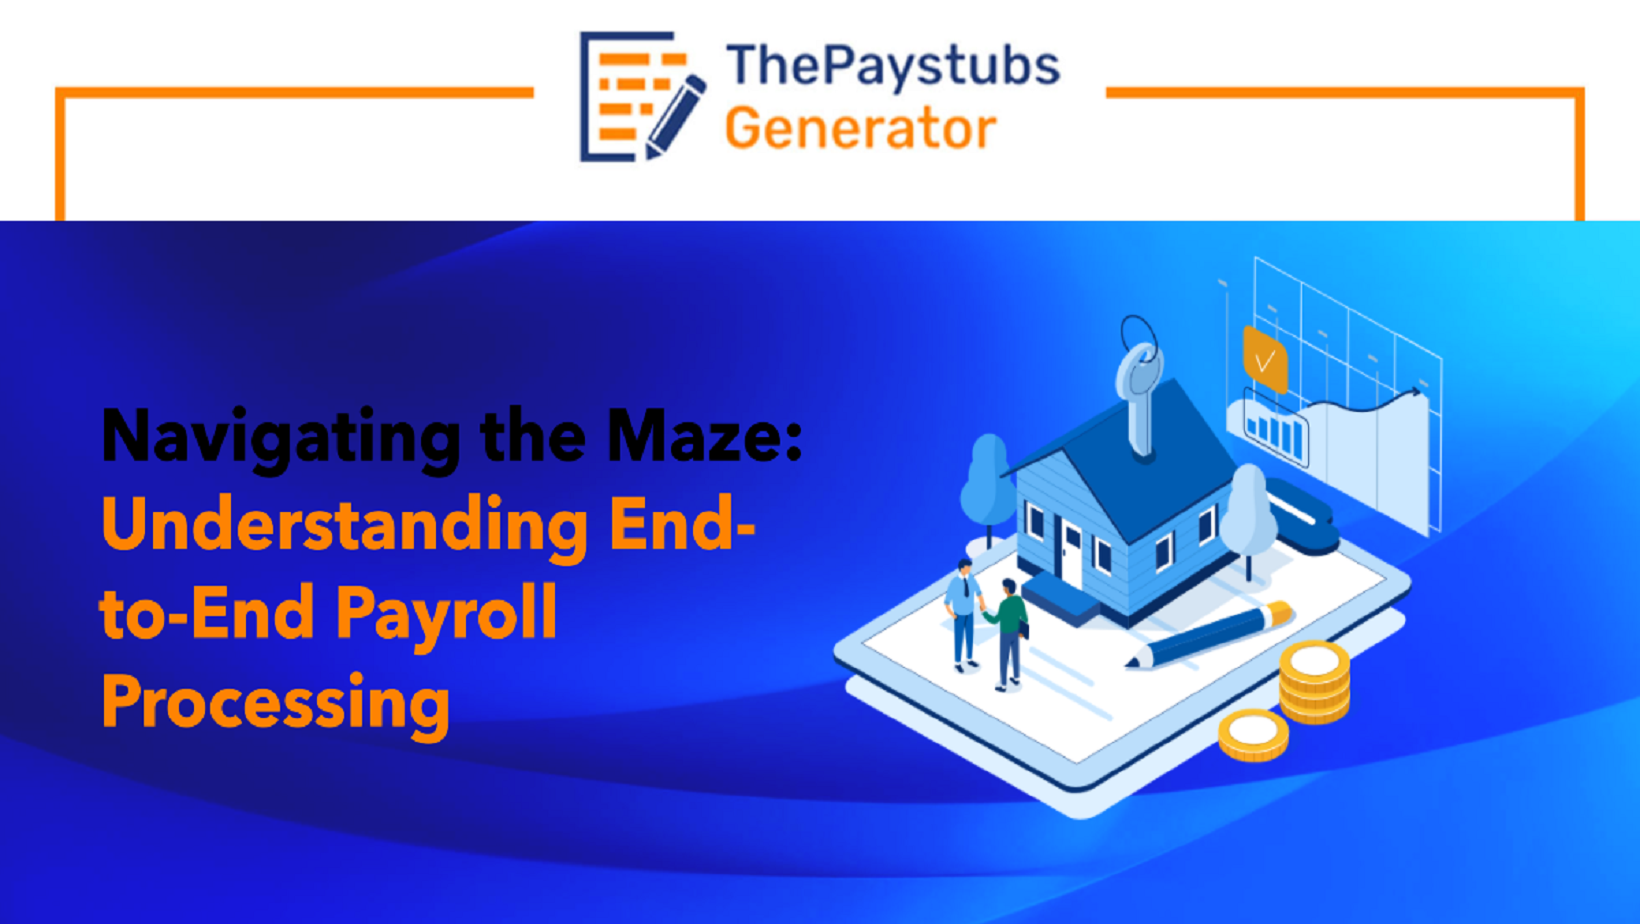 Navigating the Maze: Understanding End-to-End Payroll Processing